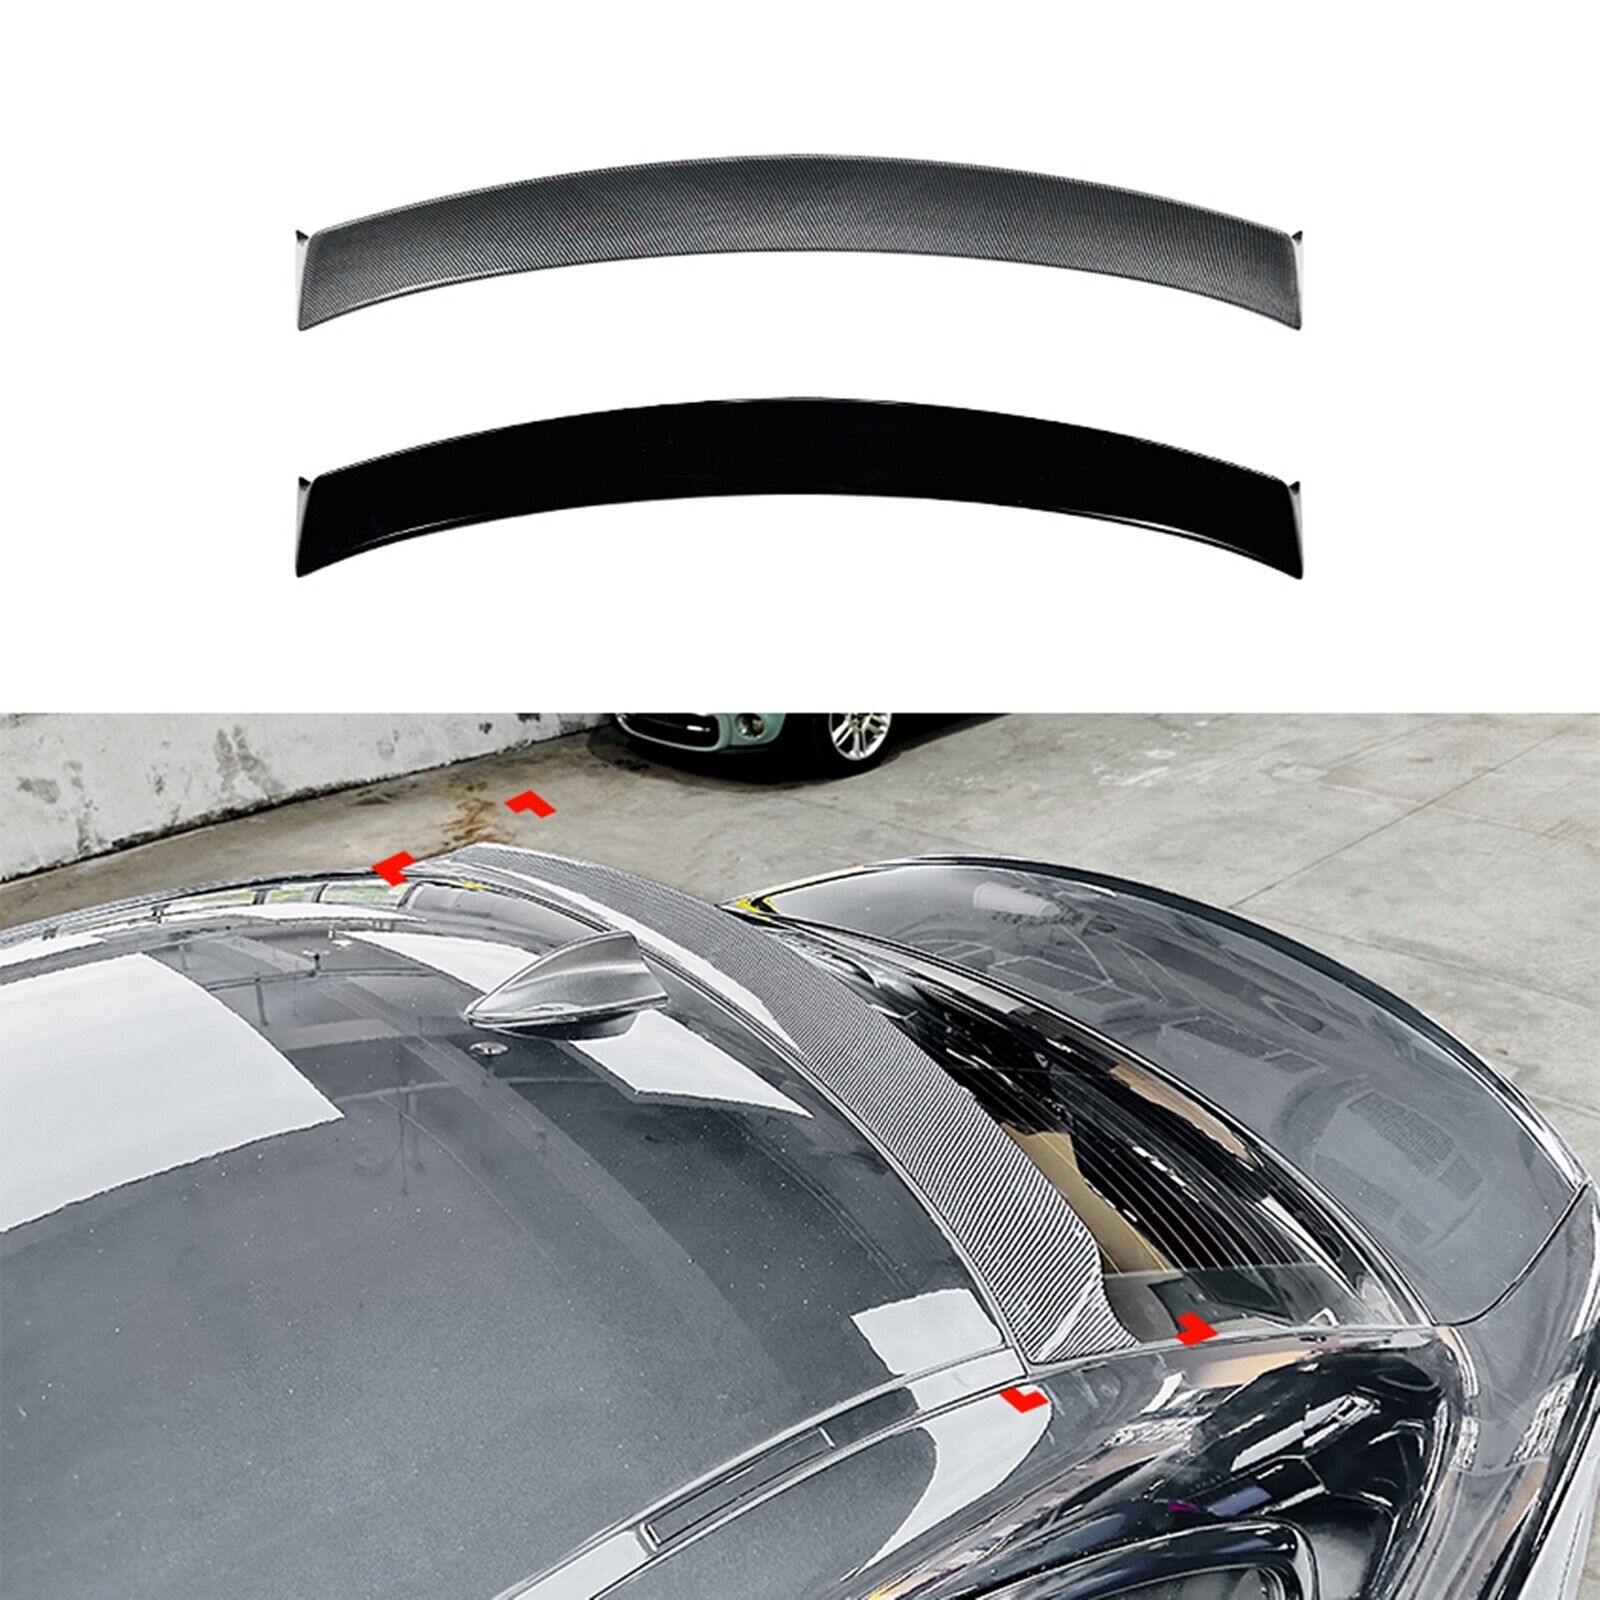 Carbon Look Rear Trunk Spoiler Roof Lip For BMW E82 Coupe 120i 128i M1 2008-2013